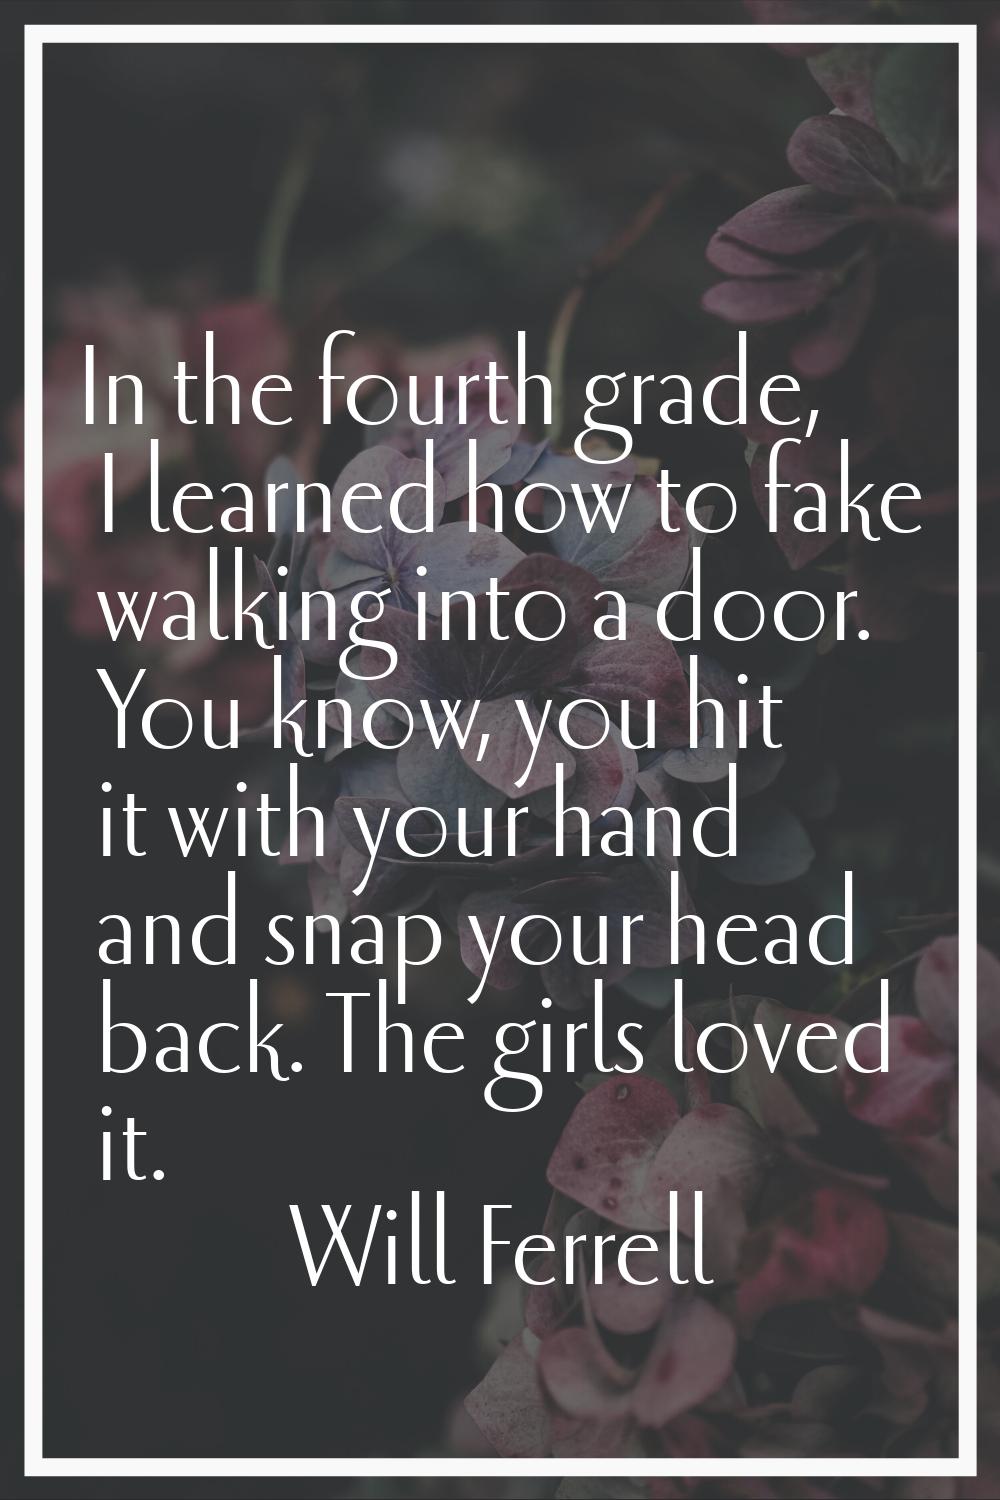 In the fourth grade, I learned how to fake walking into a door. You know, you hit it with your hand